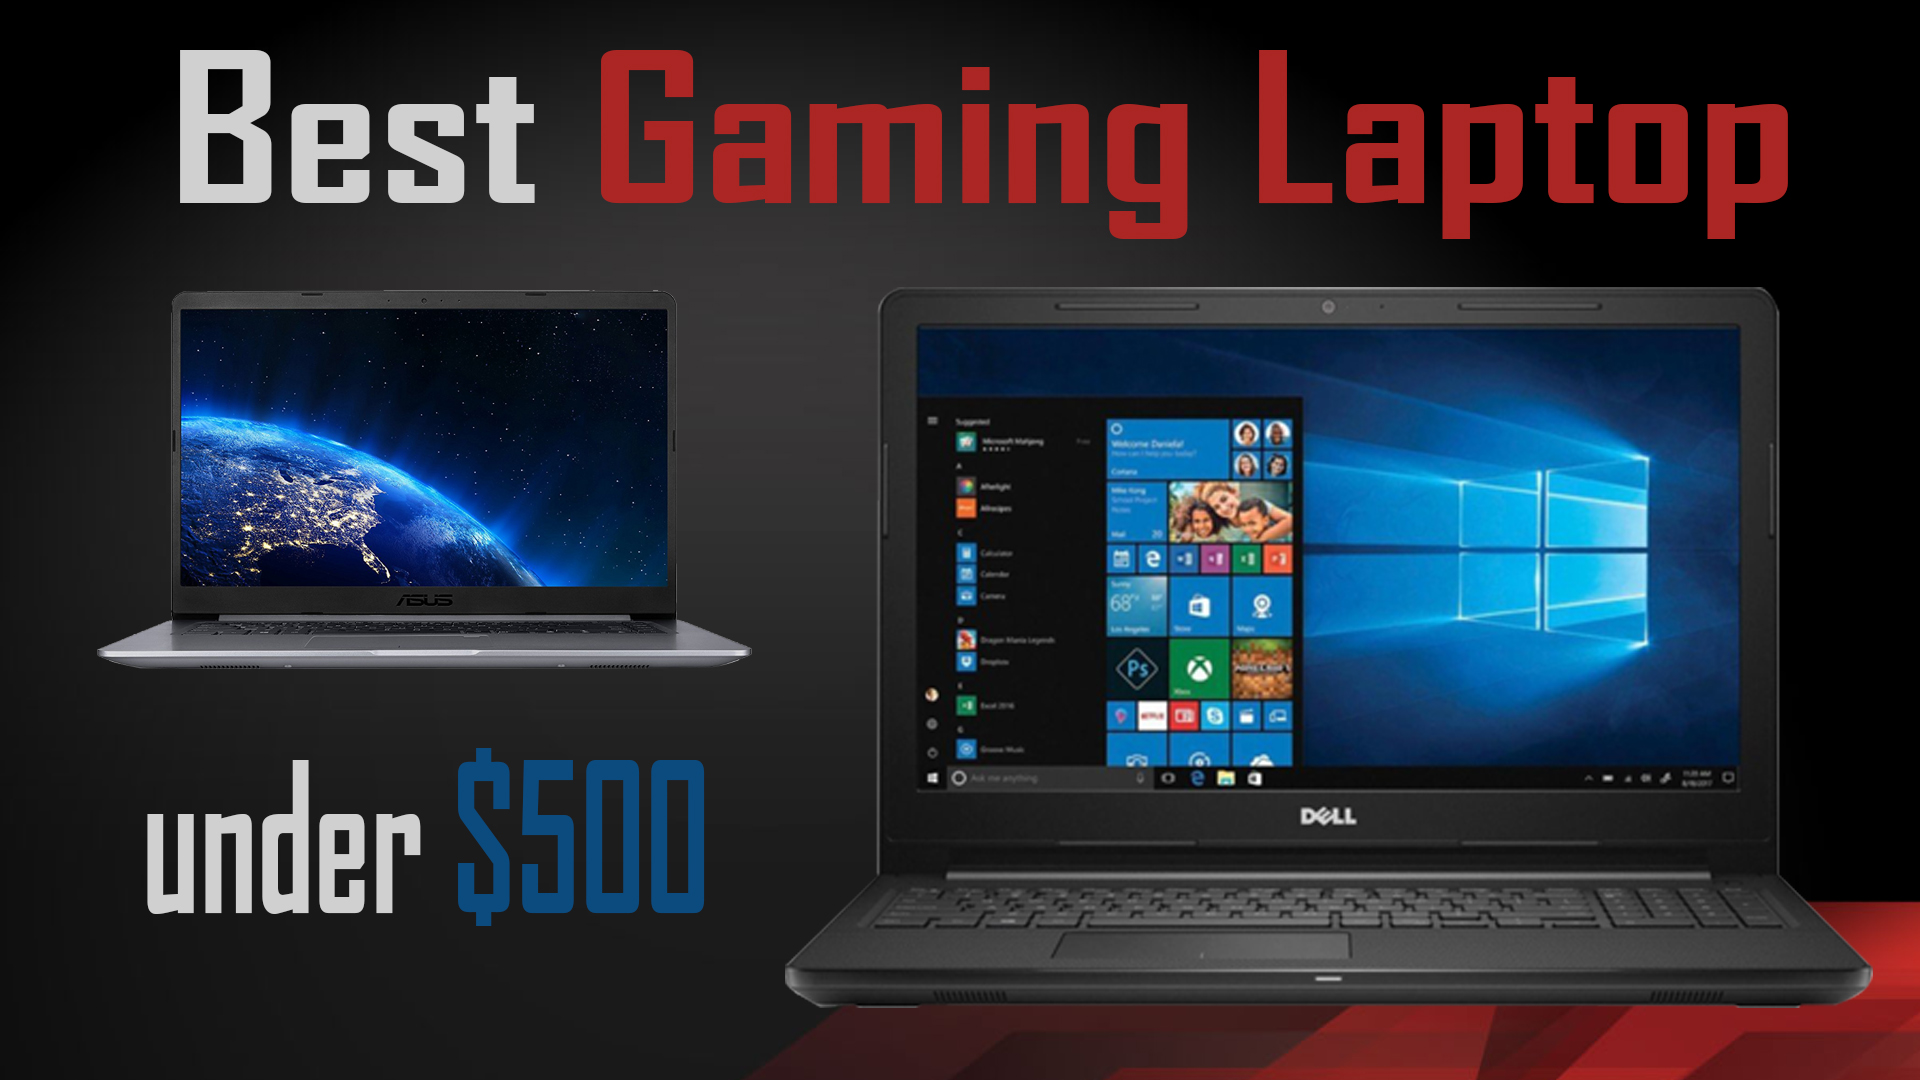 5 Best Gaming Laptop under $500: Top Budgeted Gaming Laptops of 2021